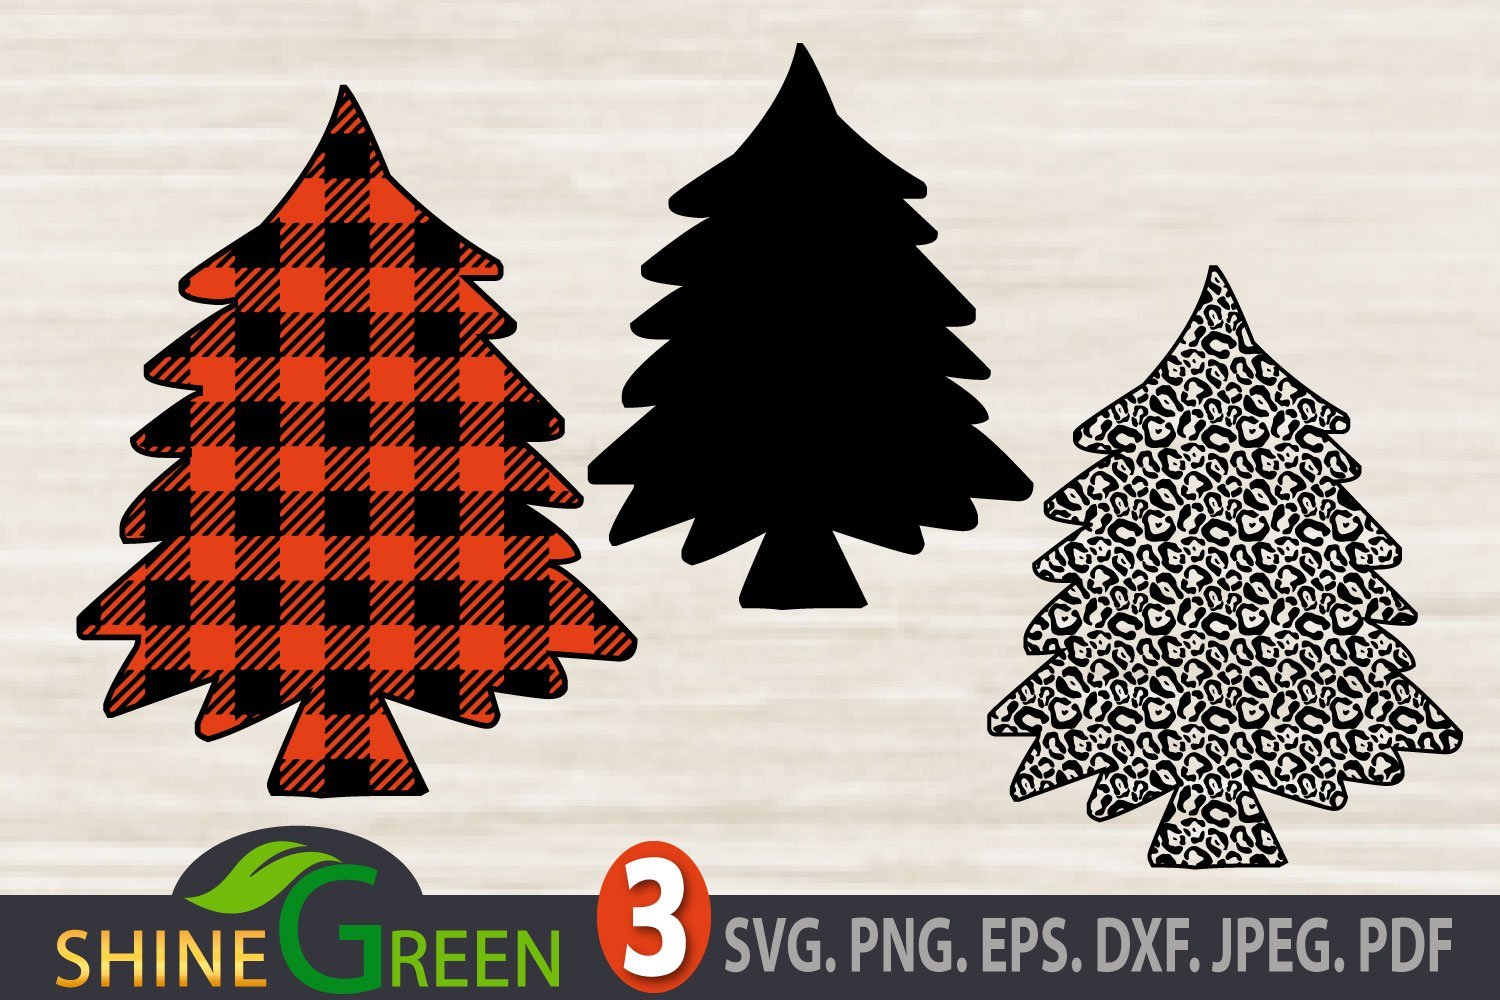 Download Dxf Svg Christmas Tree Clipart With Ornaments Holidays Instant Digital Download Svg Jpeg Png Eps Clip Art Art Collectibles